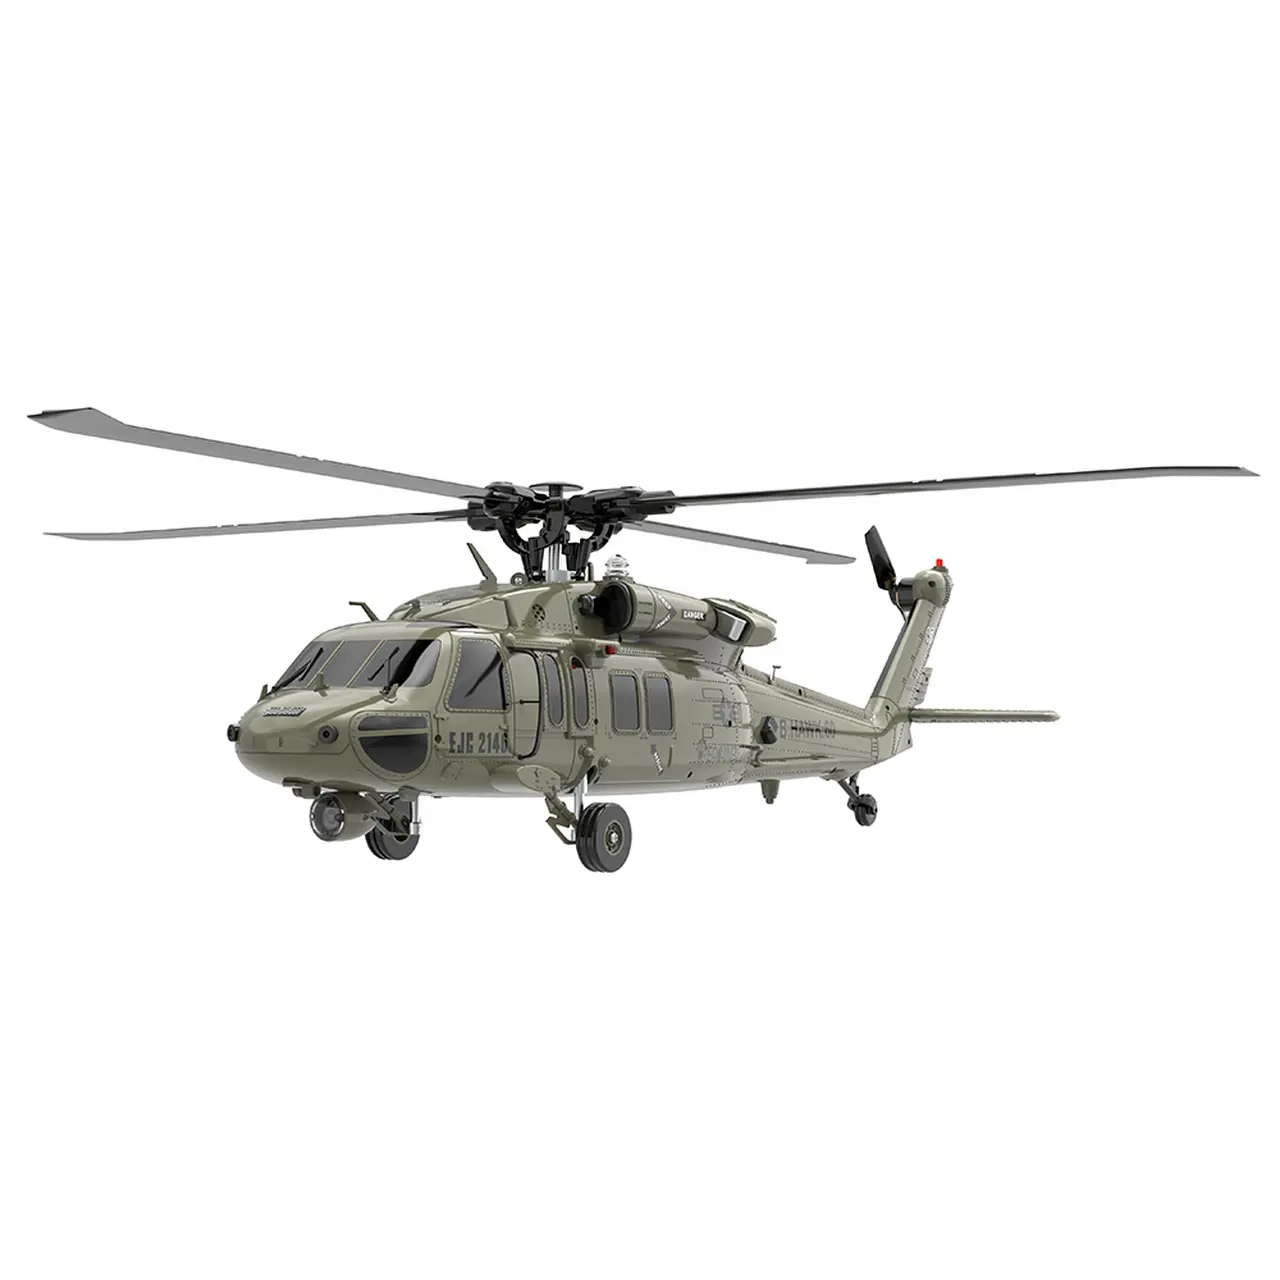 Hot Real Simulation F09 UH60 Black RC Helicopter 6 CH 1/47 Scale for Personal Hobby Plane